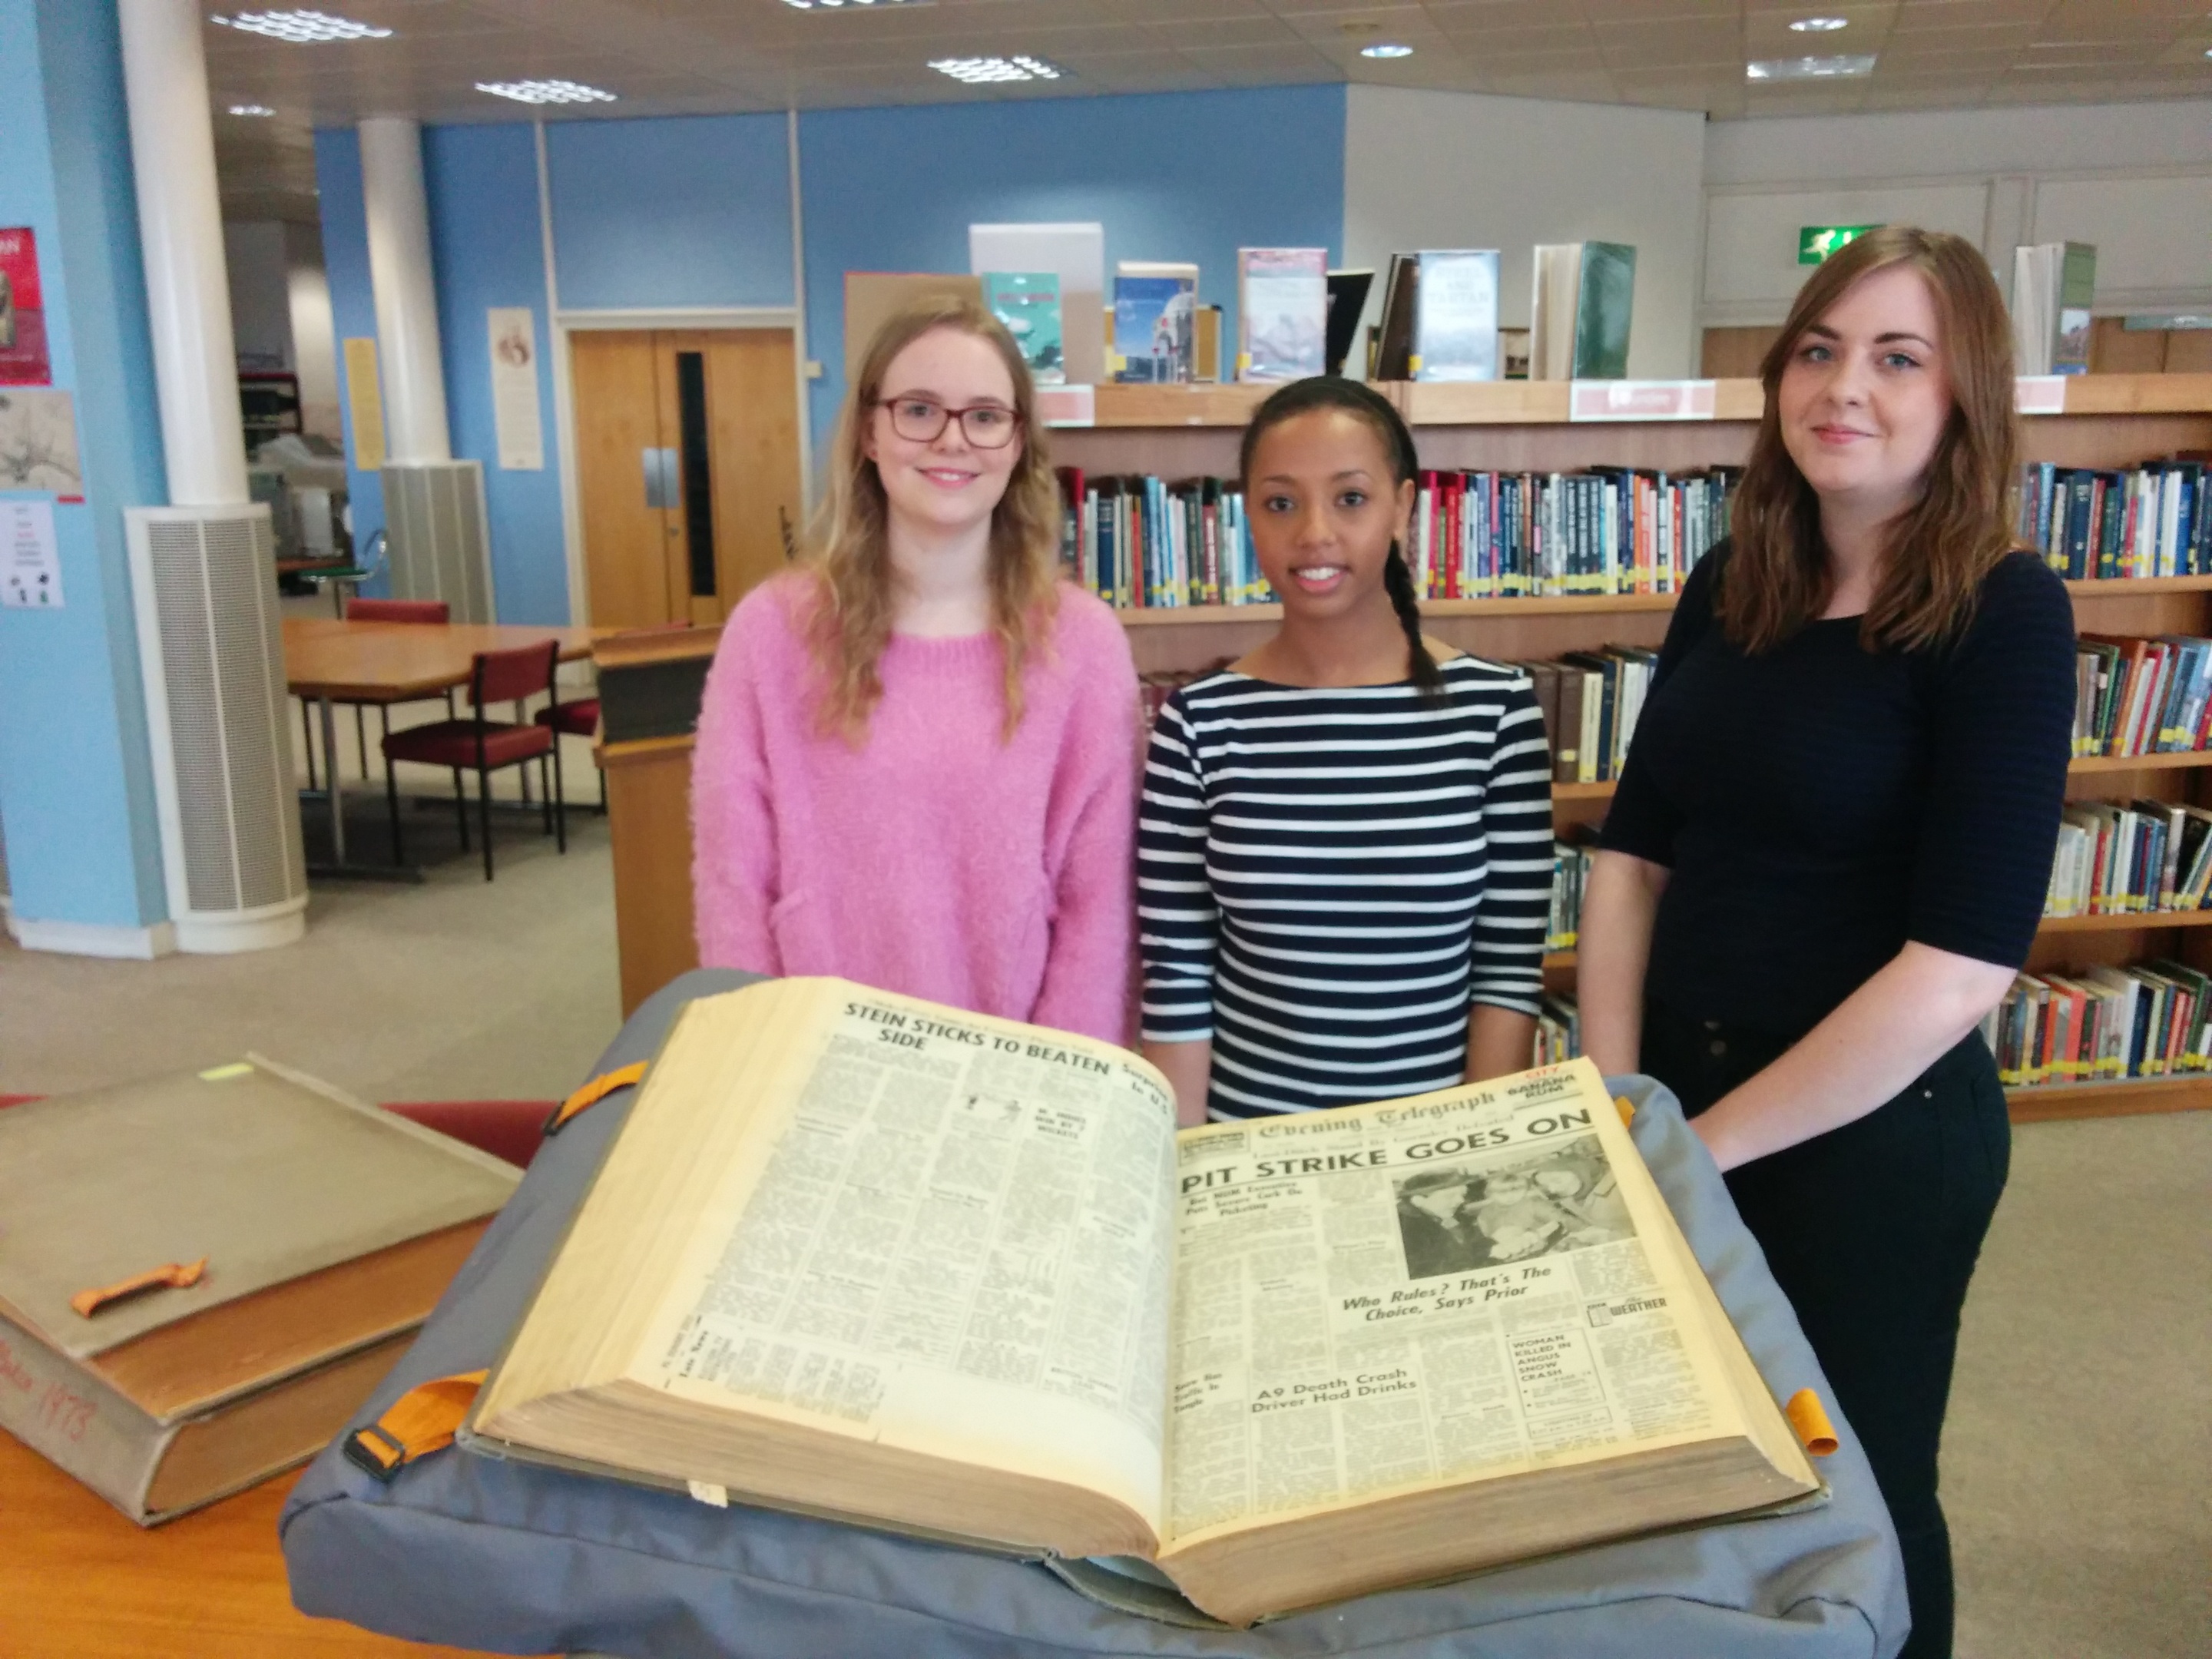 Abertay University forensic psychology students (l to r) Mhairi Anderson, Nesha Dixon an Amy Morrison who searched for missing persons reports.